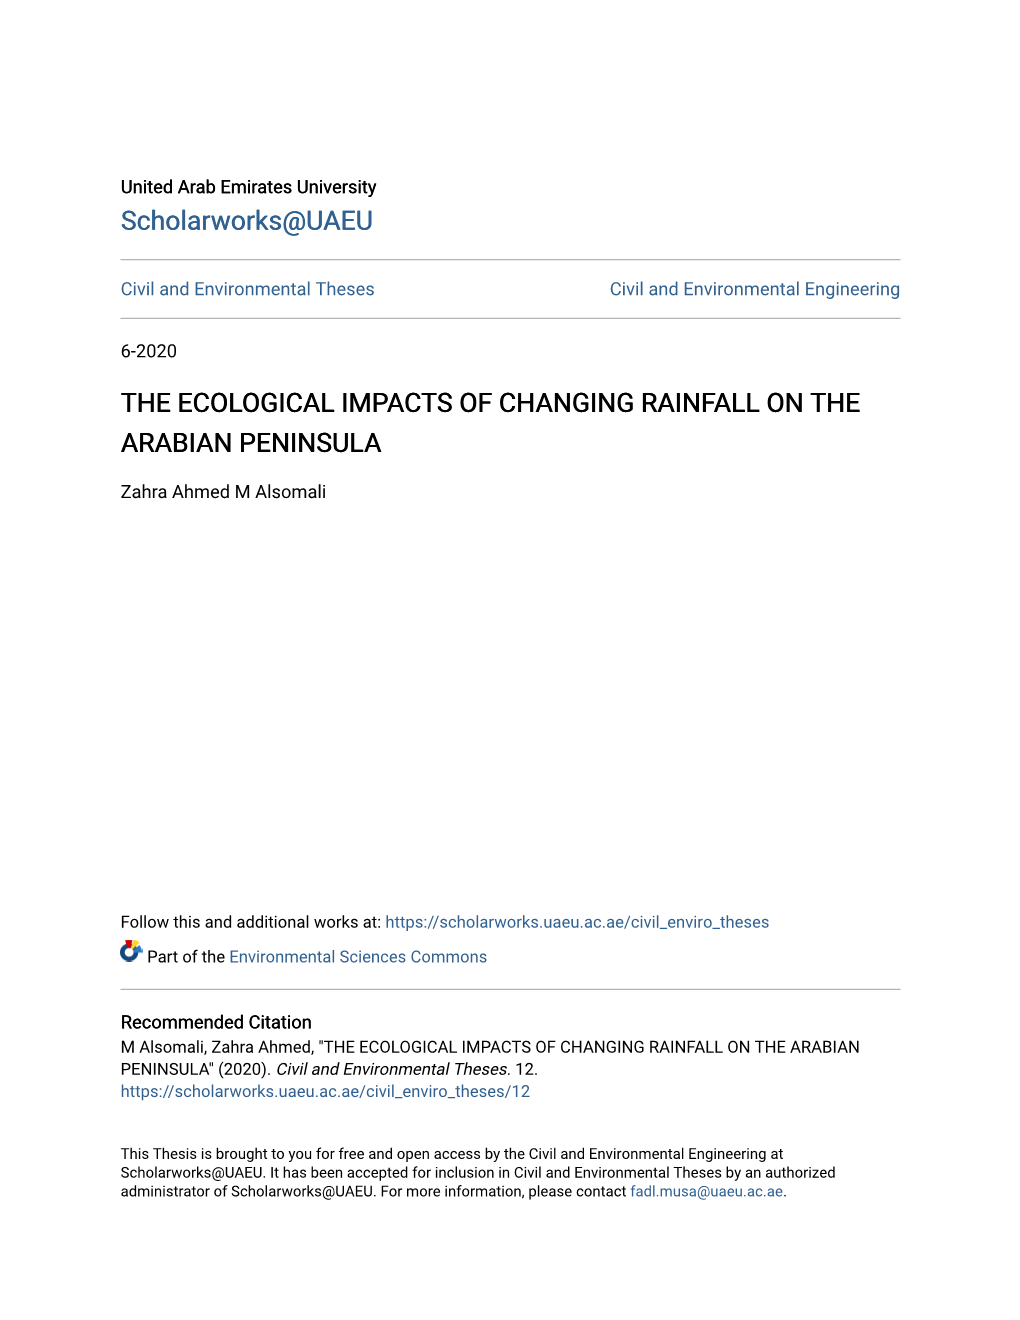 The Ecological Impacts of Changing Rainfall on the Arabian Peninsula